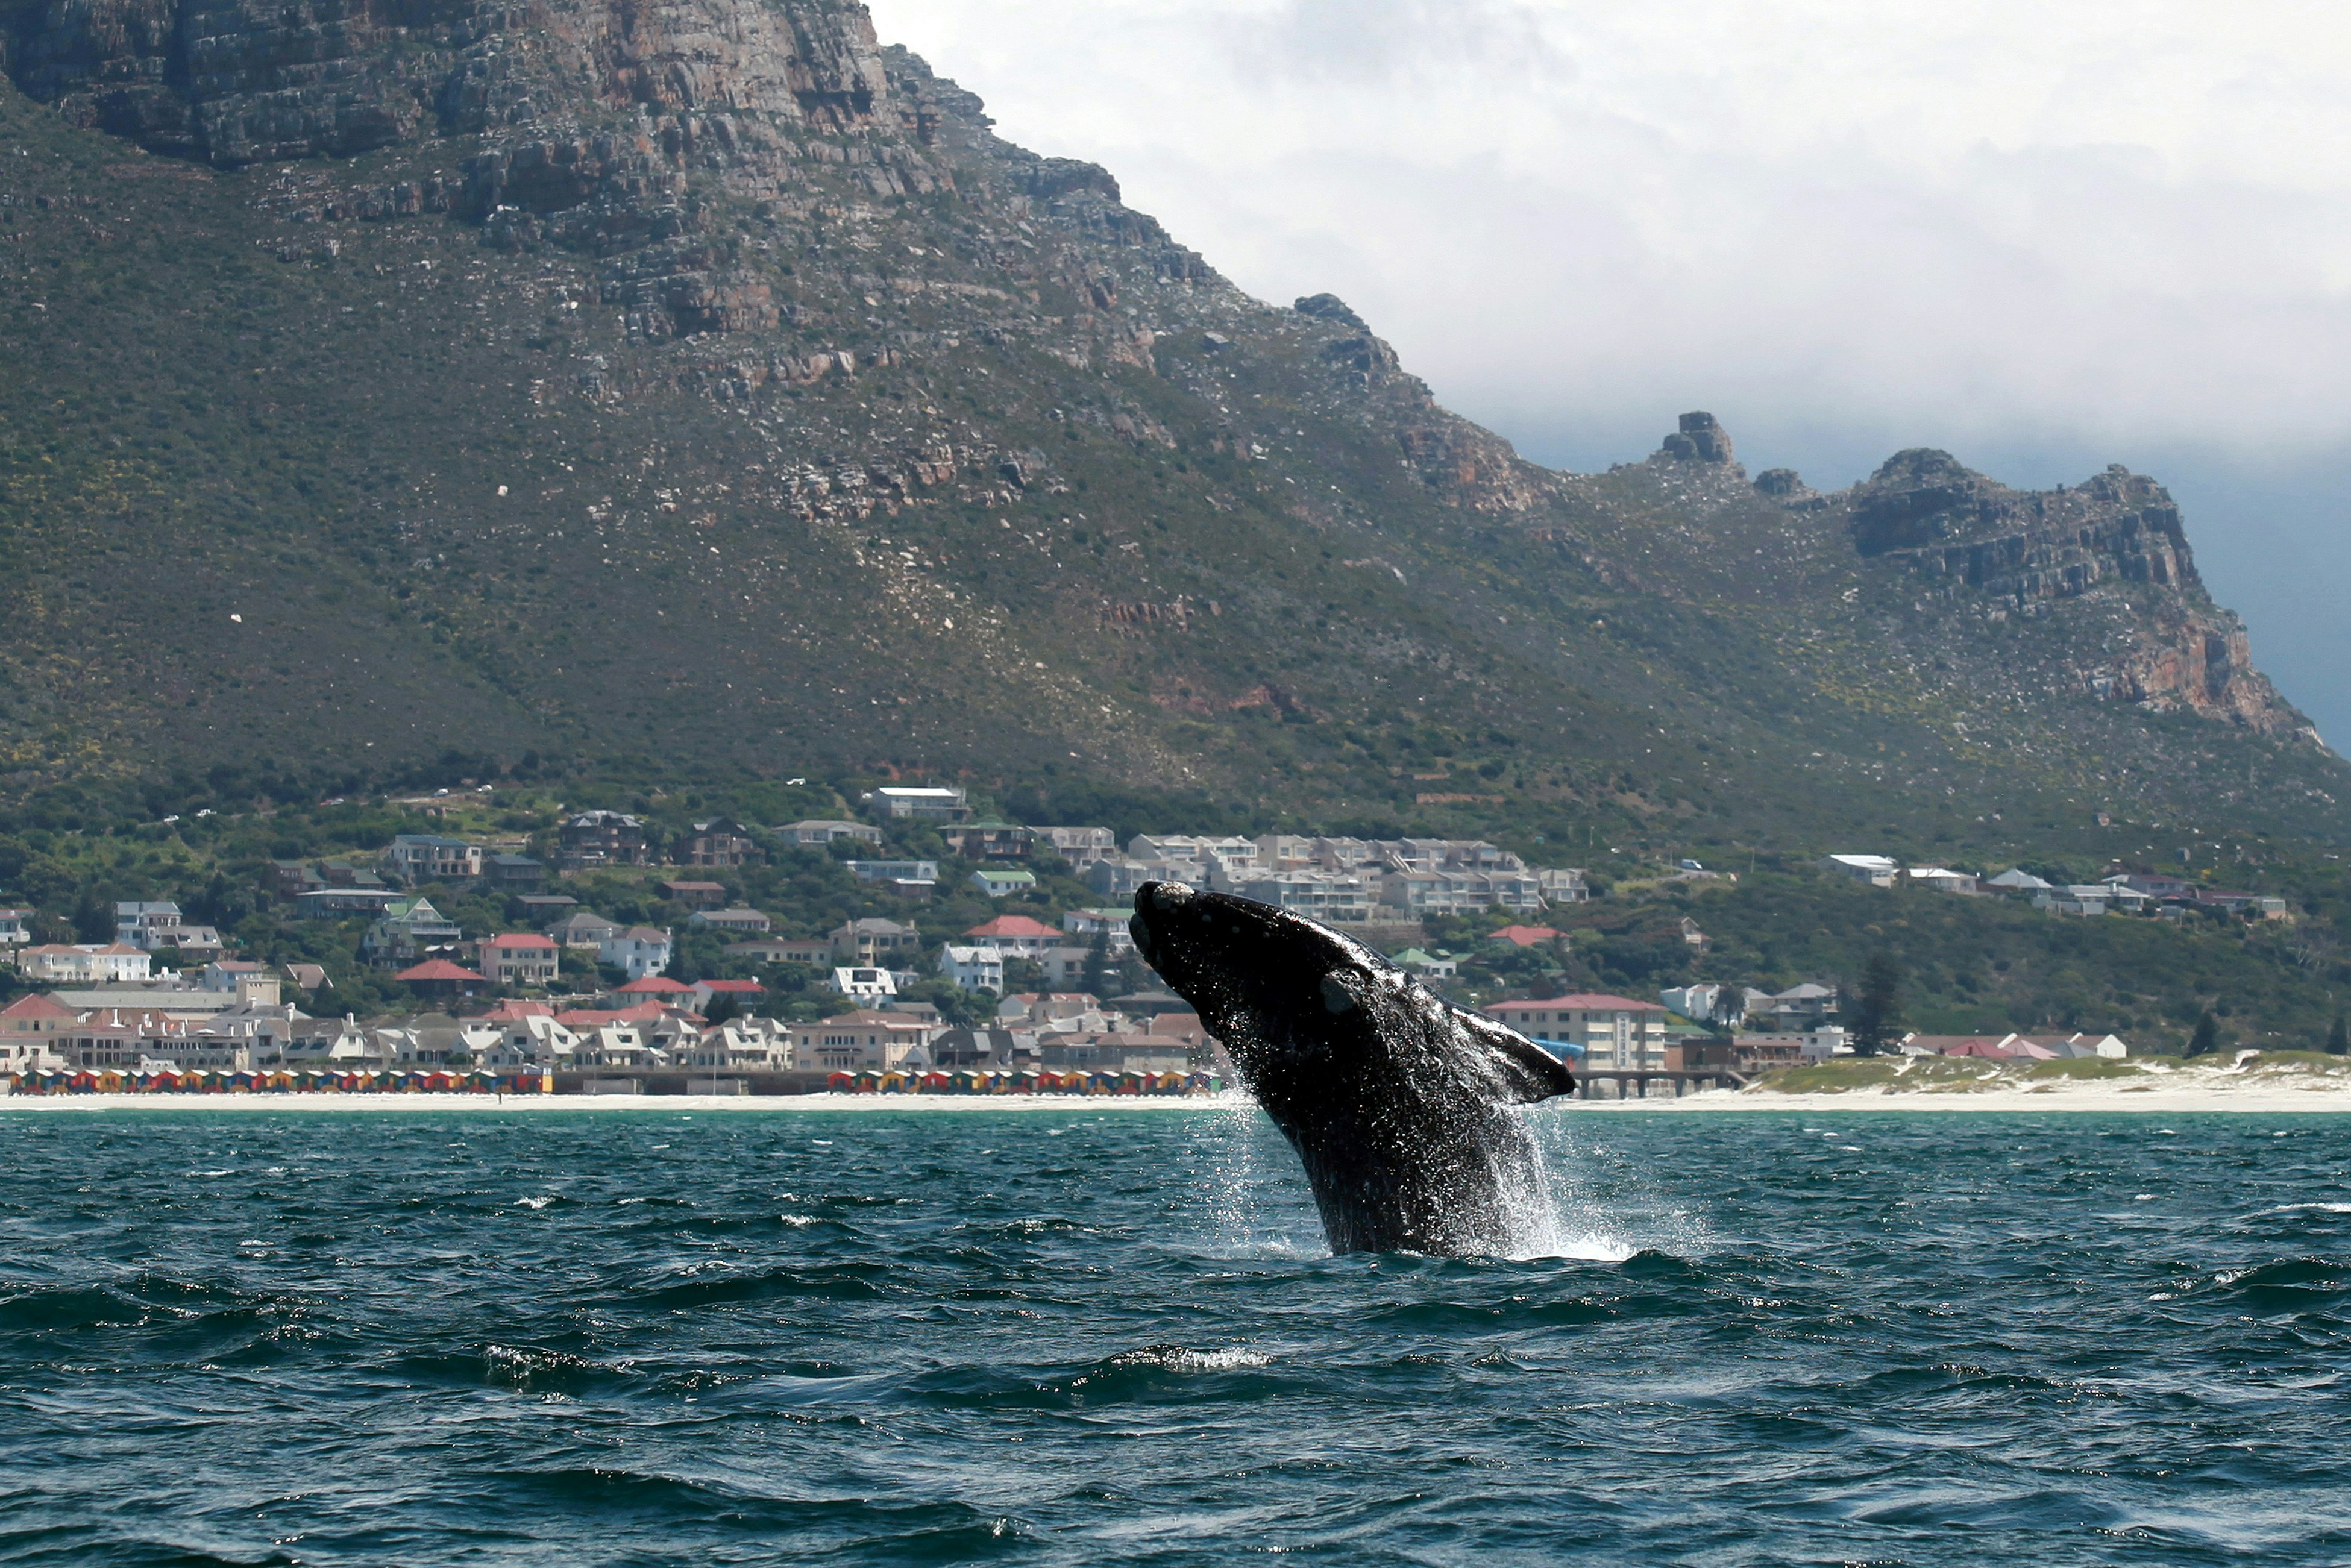 A Southern right whale breaches near the shore of Muizenberg Beach in False Bay, Cape Town